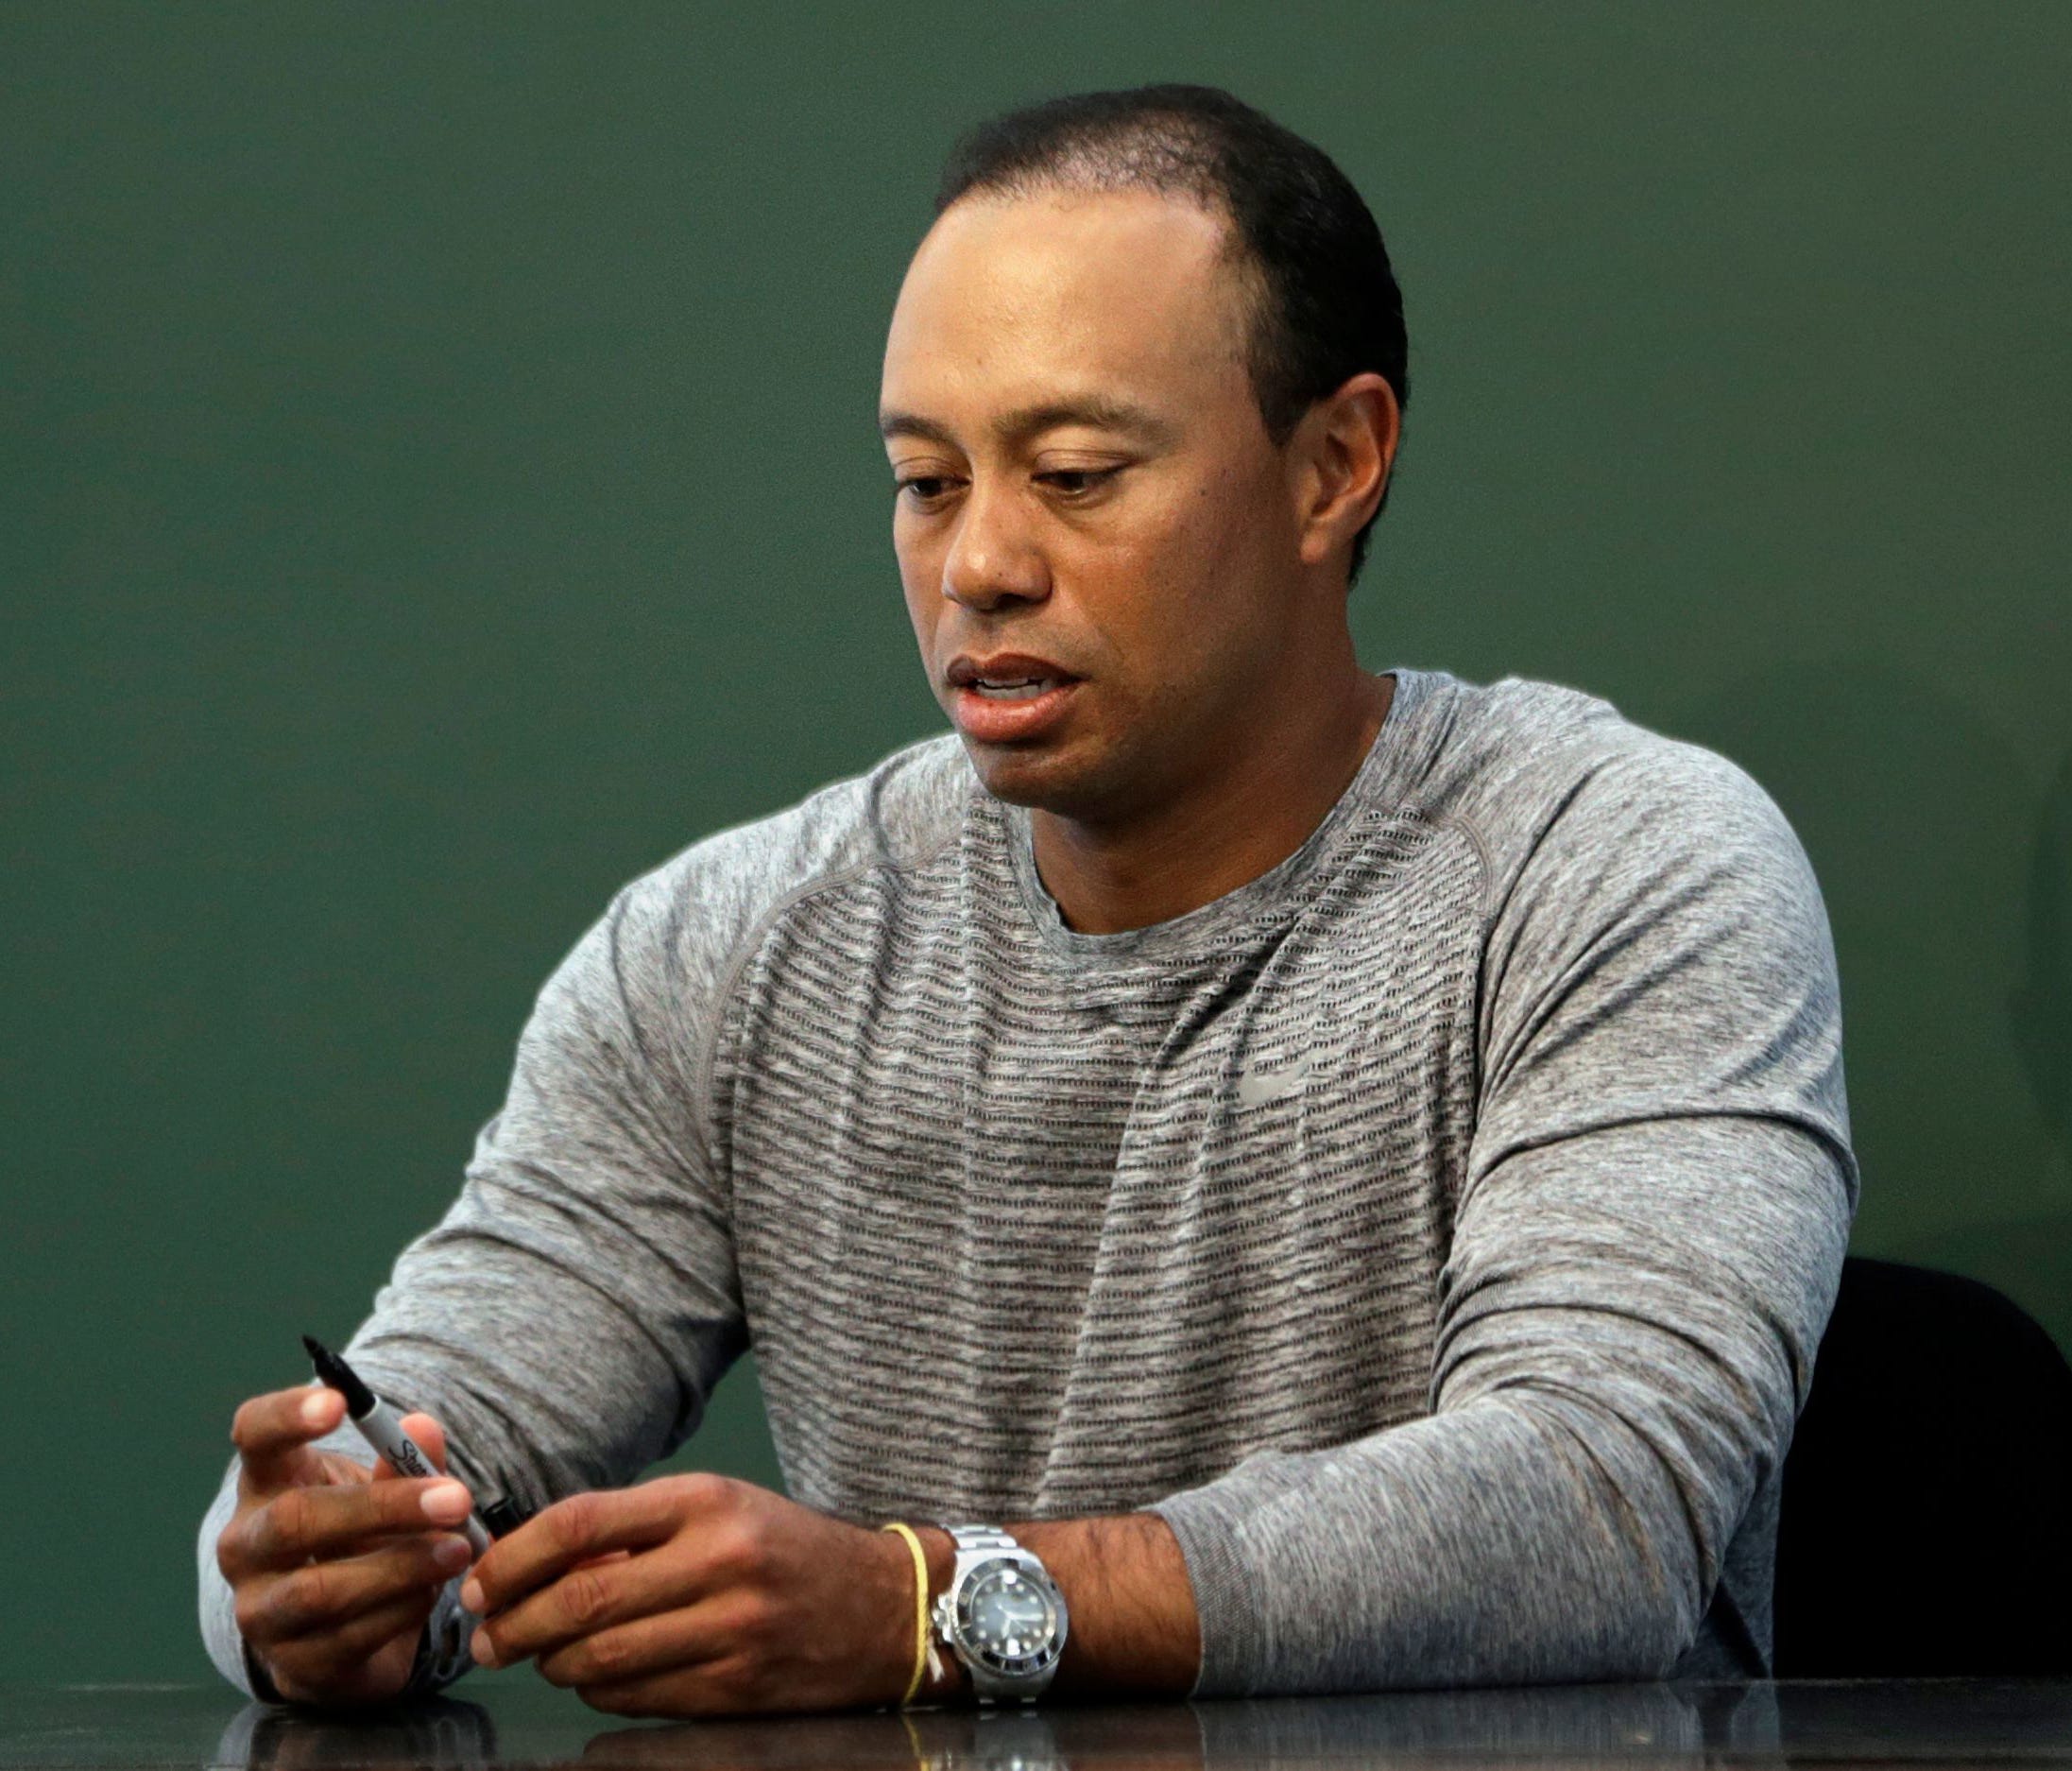 Tiger Woods had five drugs in his system when he was arrested, a report says.